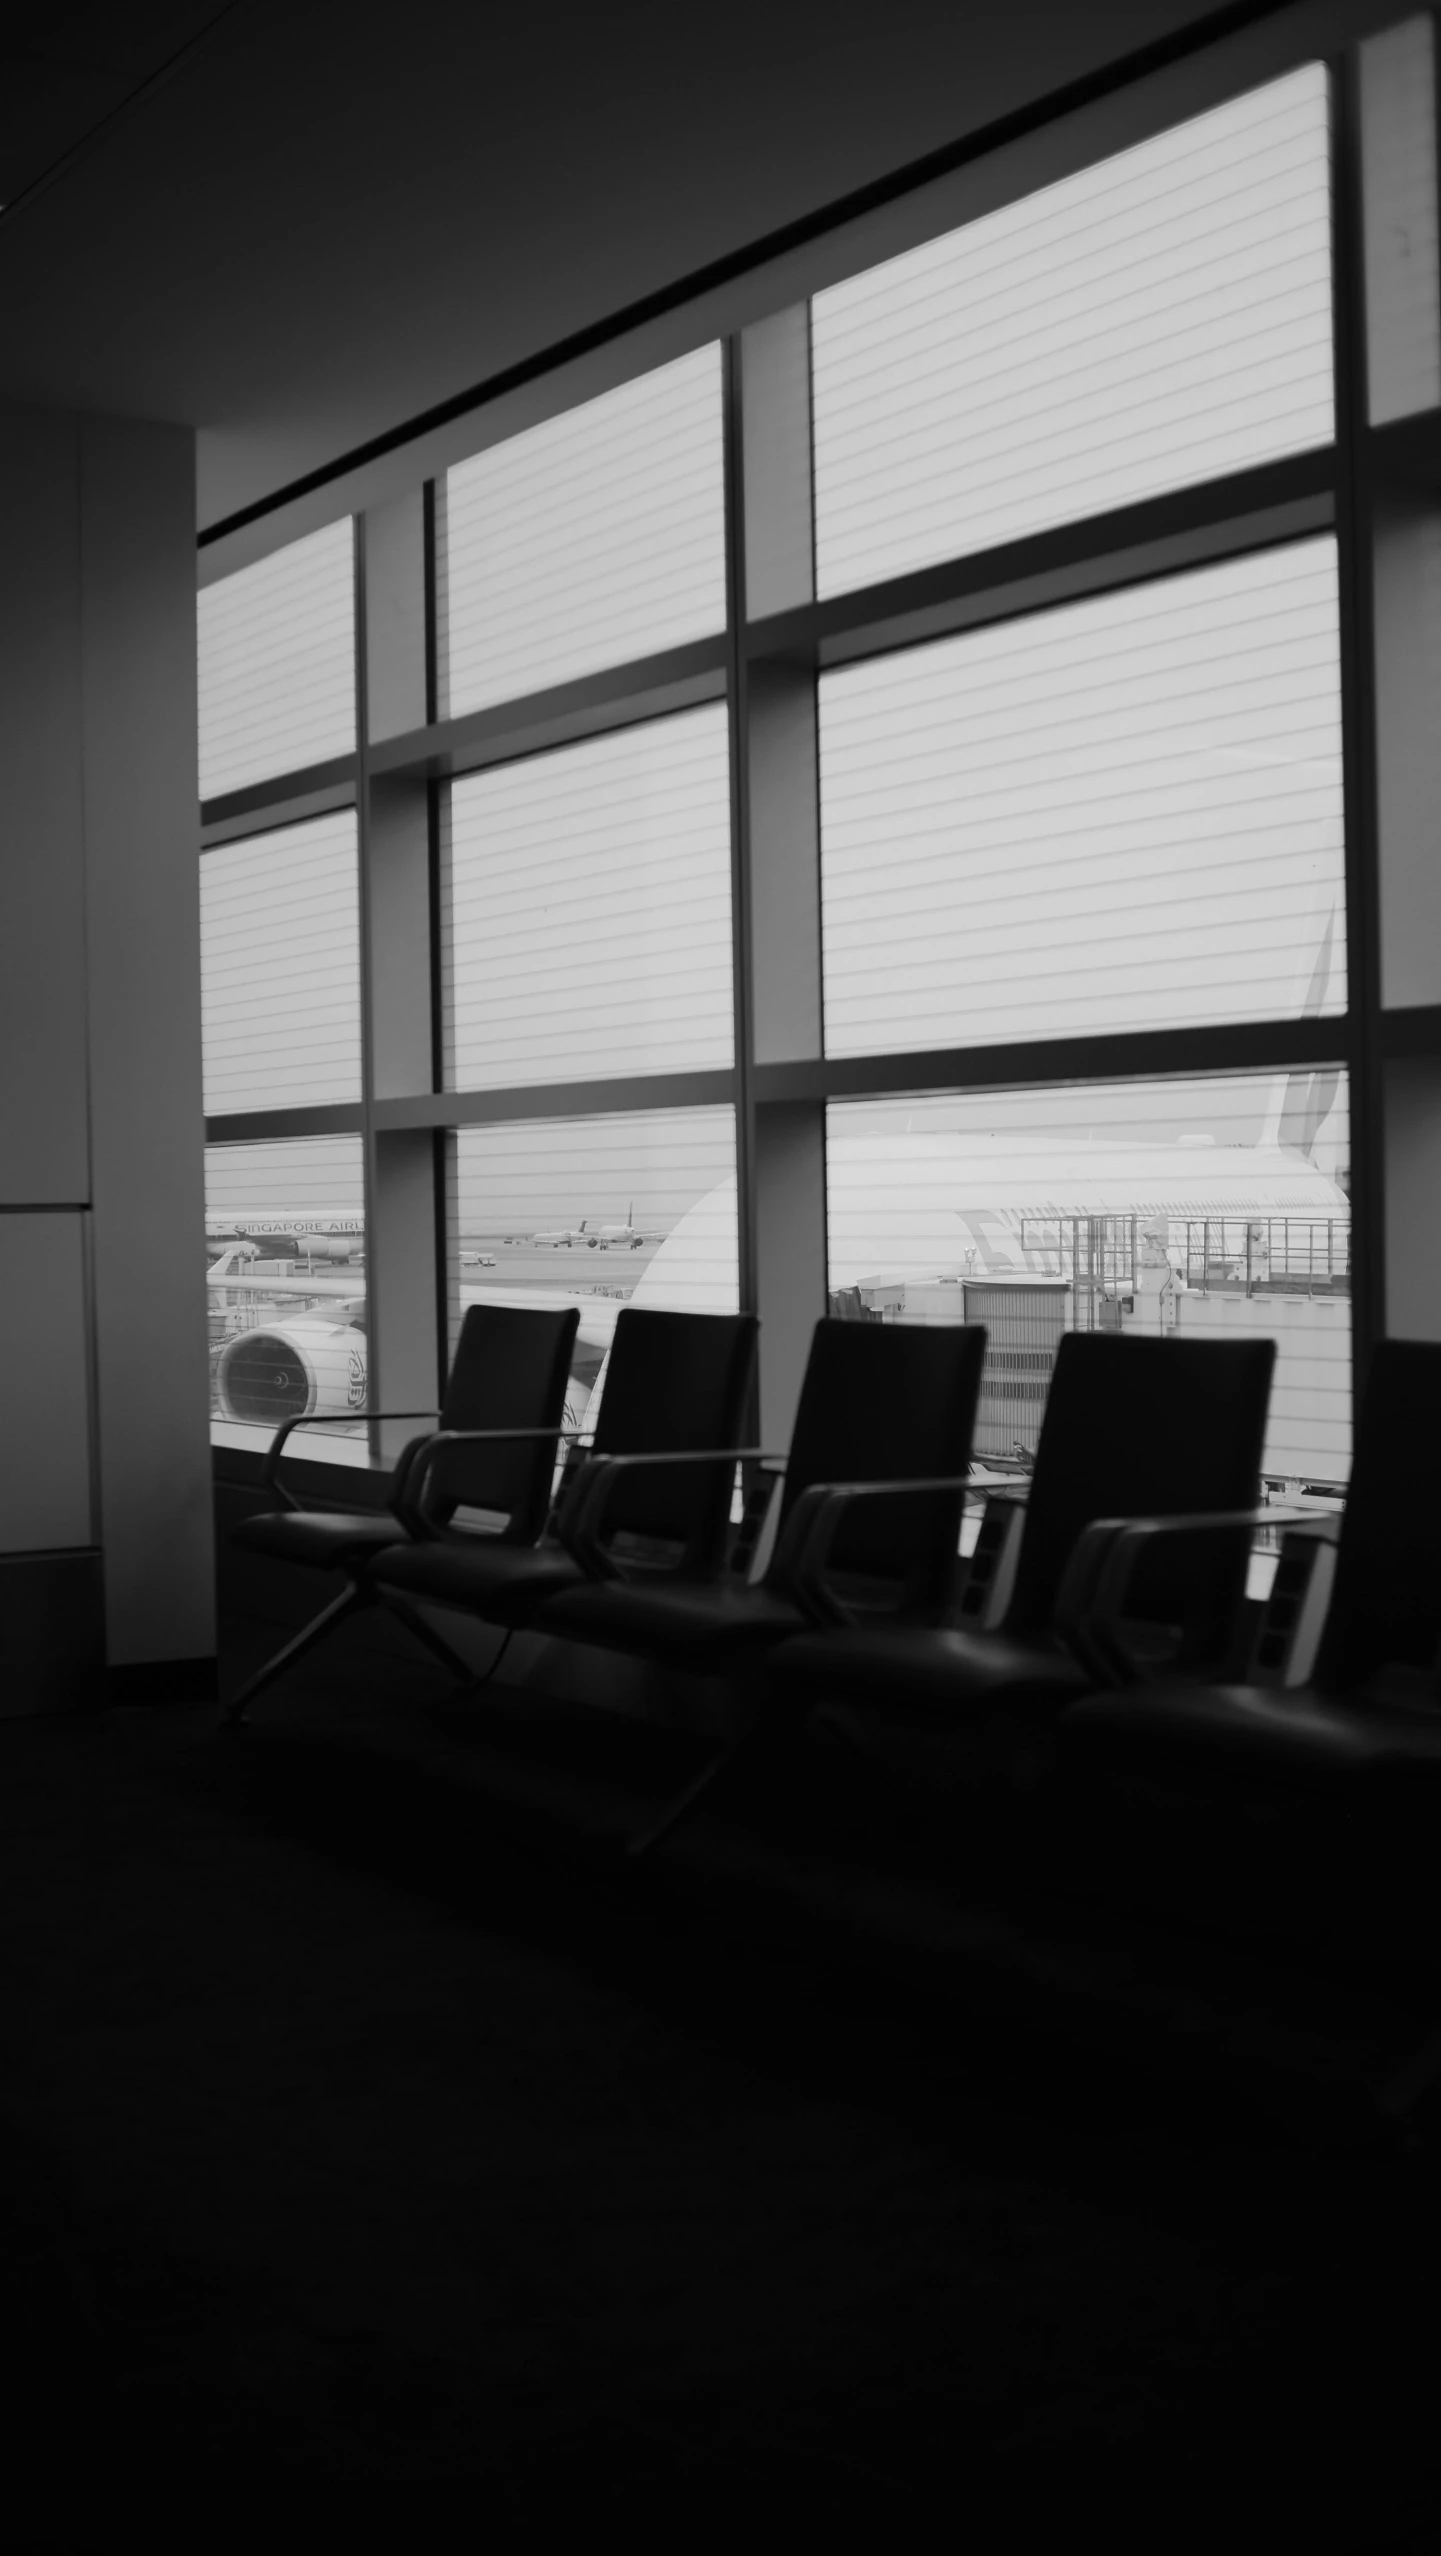 black and white po of an airport waiting area with lots of chairs in front of a large window